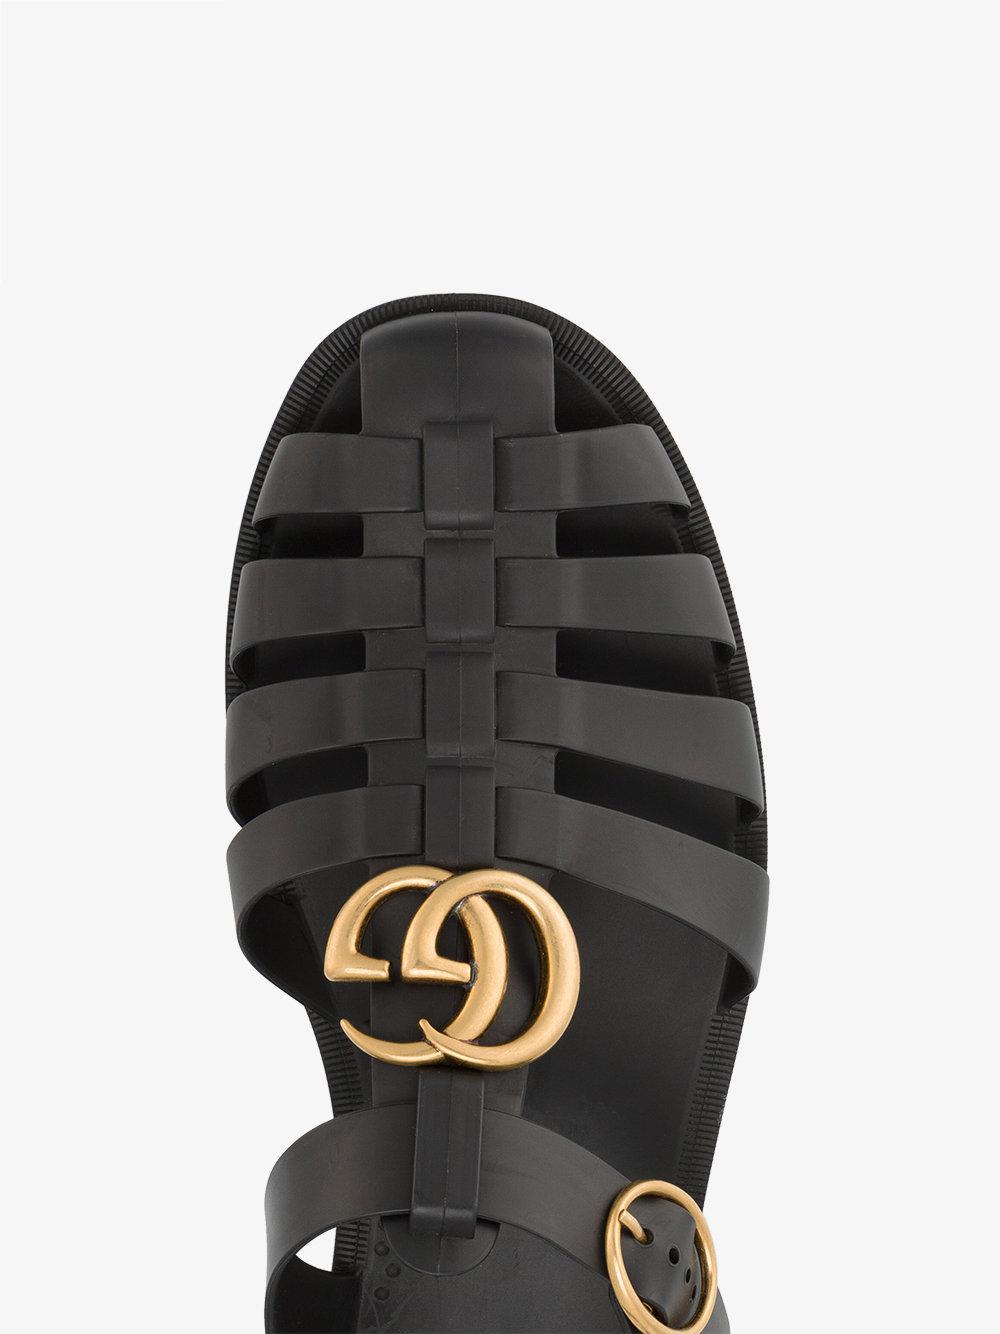 Gucci Rubber Buckle Strap Jelly Sandals in Black for Men - Lyst